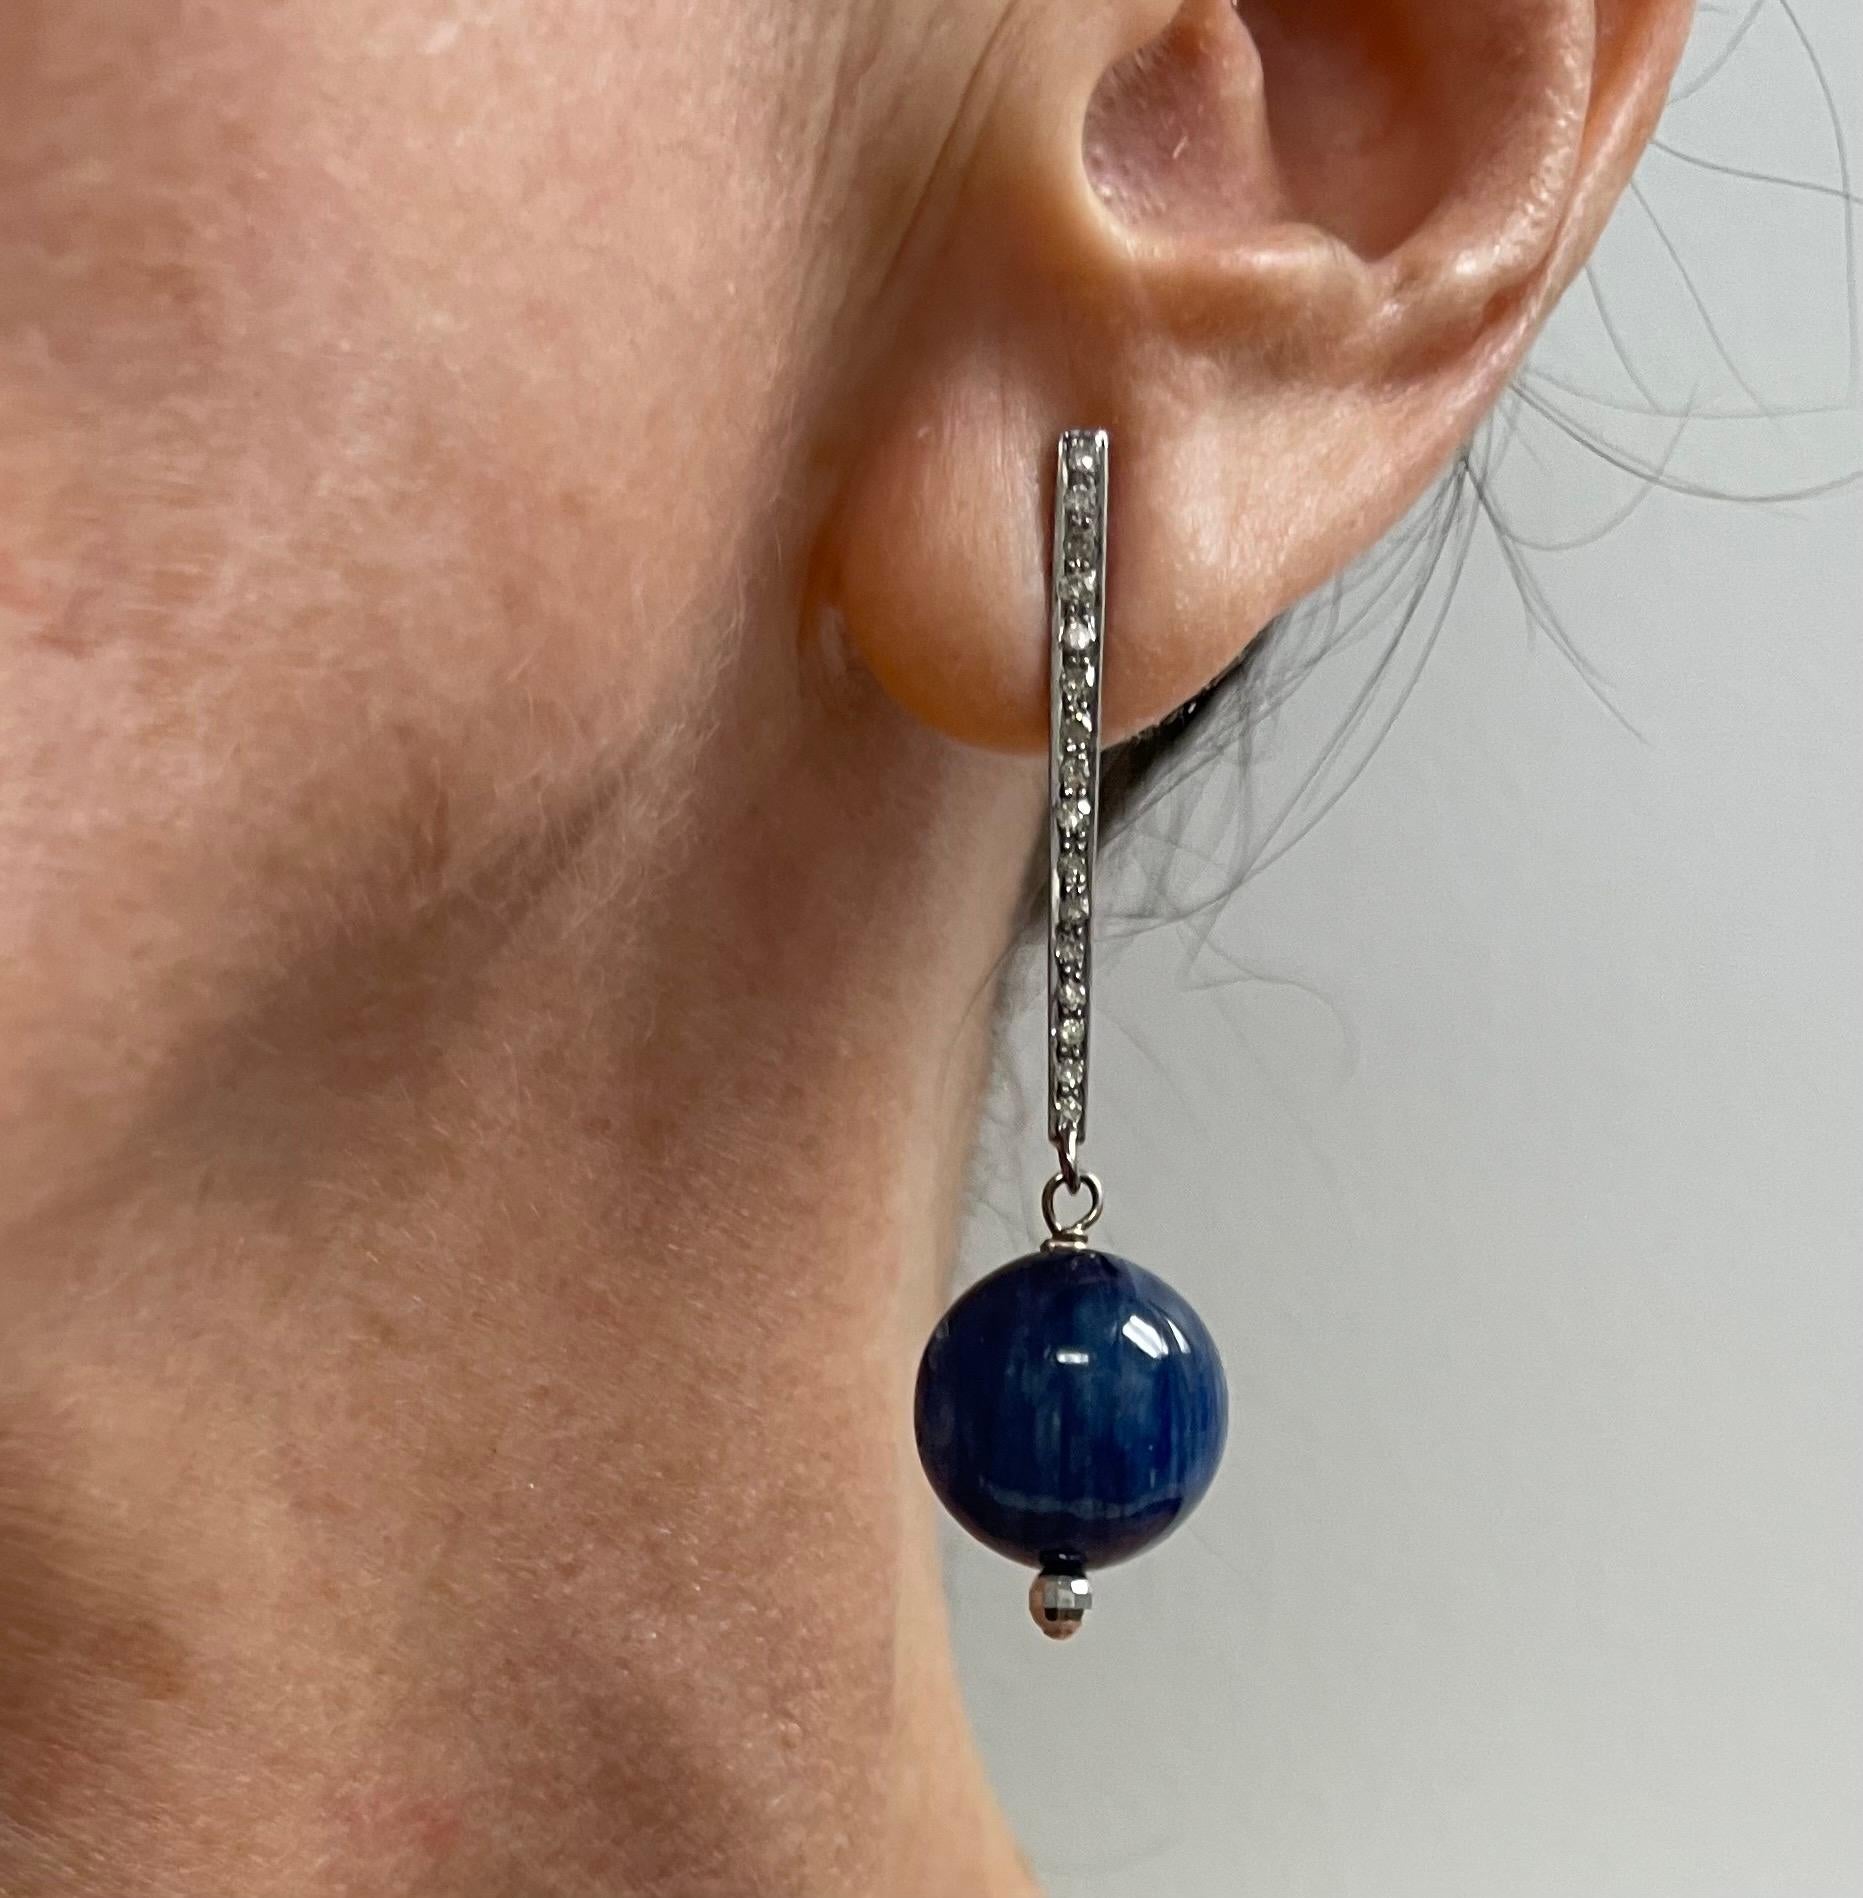 Description
Understated, yet elegant indigo blue color chatoyant Kyanite earrings. The beauty of the earrings is expressed in the details of the faceted ball and the tapered pave diamond bar/post. 
Item #E3071
Check out matching bracelet, Item#